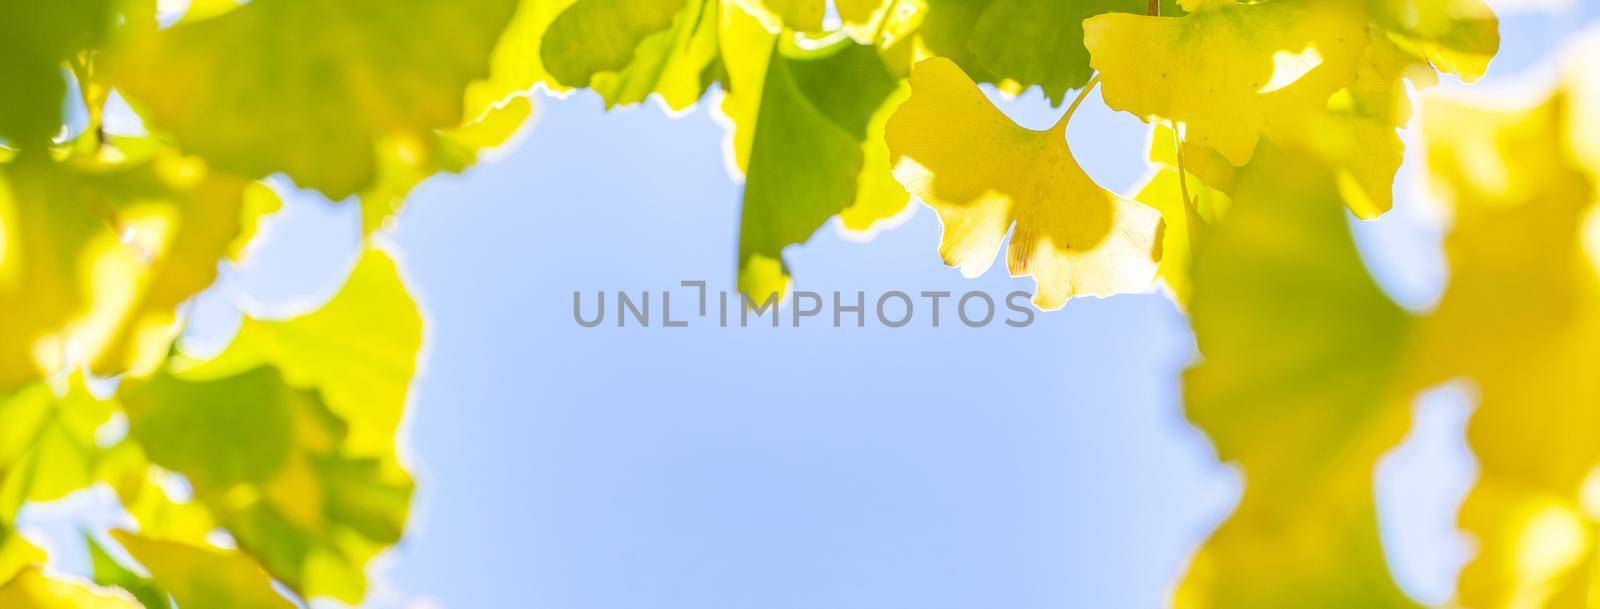 Design concept - Beautiful yellow ginkgo, gingko biloba tree leaf in autumn season in sunny day with sunlight, close up, bokeh, blurry background. by ROMIXIMAGE